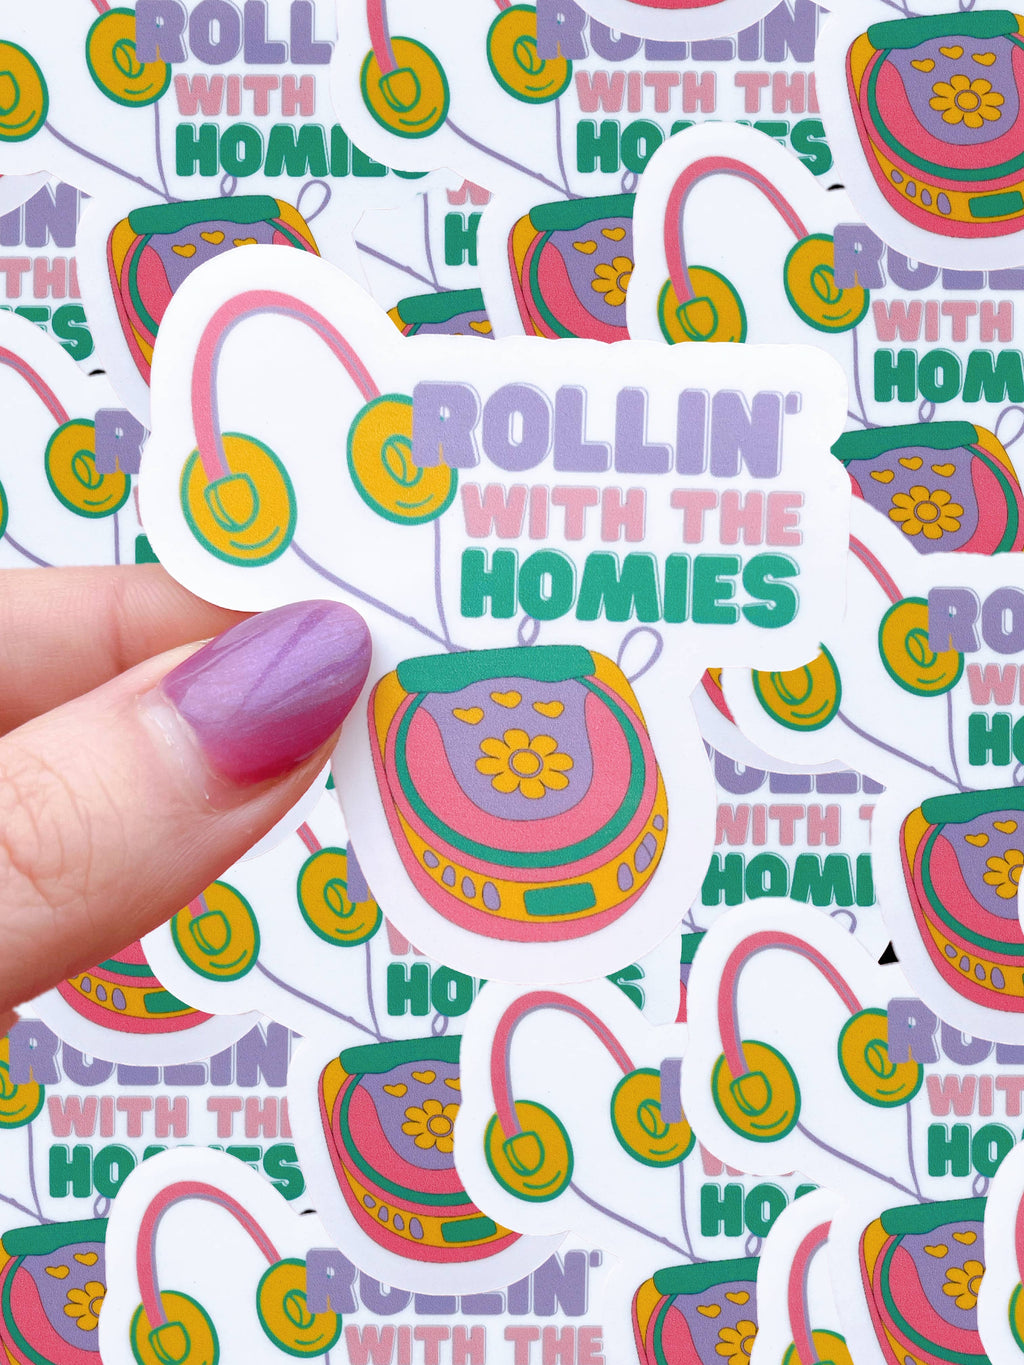 Rollin with the homies, clueless inspired waterproof sticker